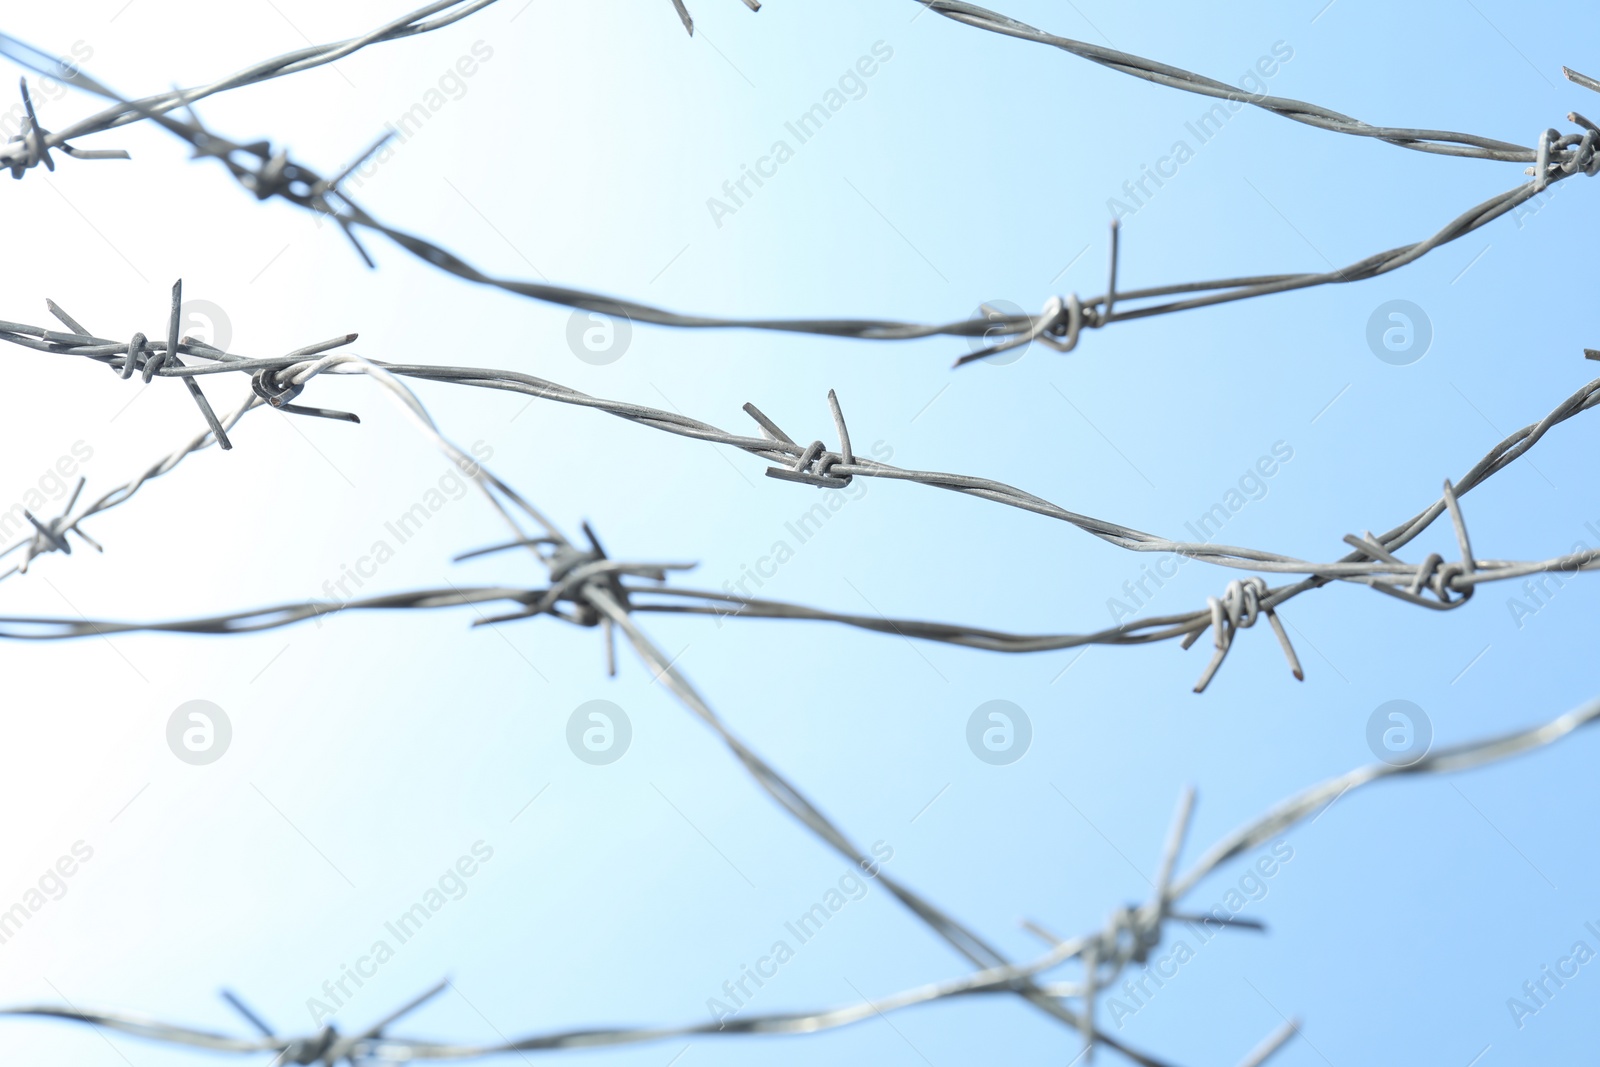 Photo of Shiny metal barbed wire on light background